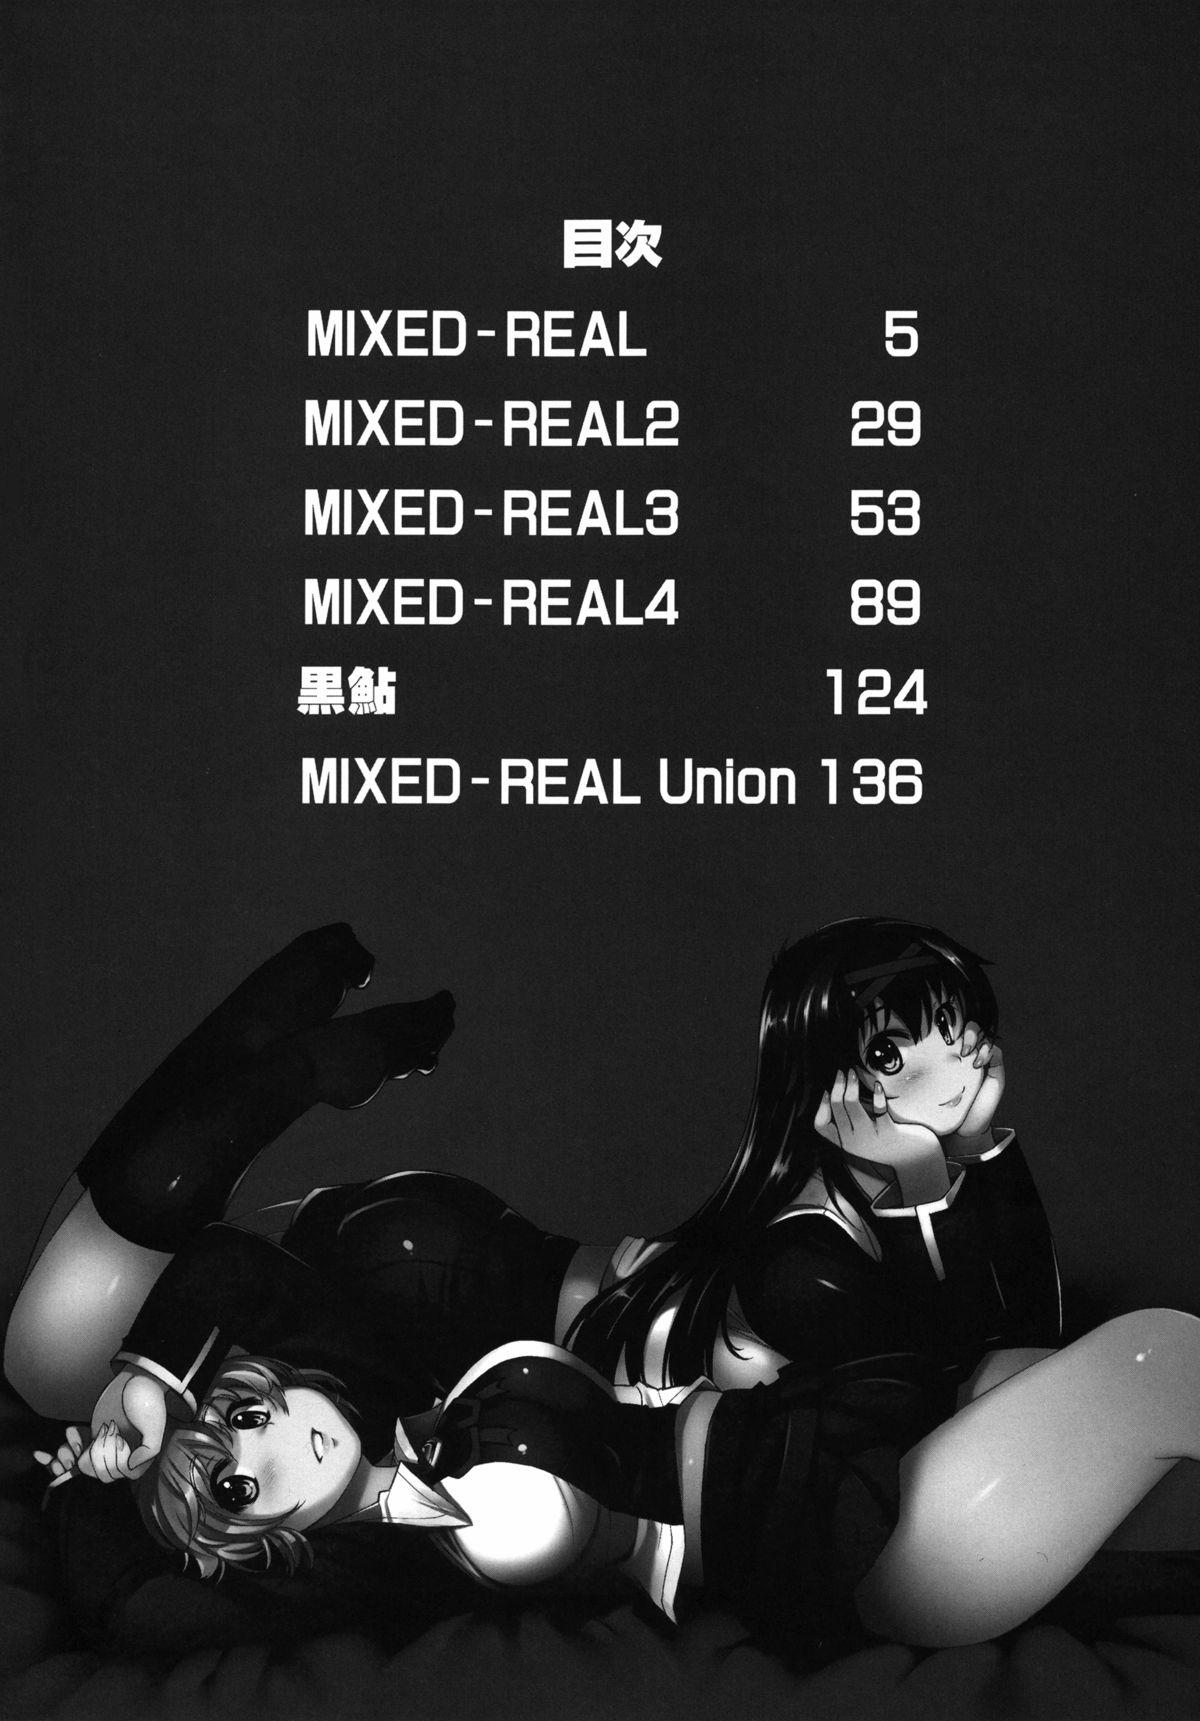 MIXED-REAL Union 2